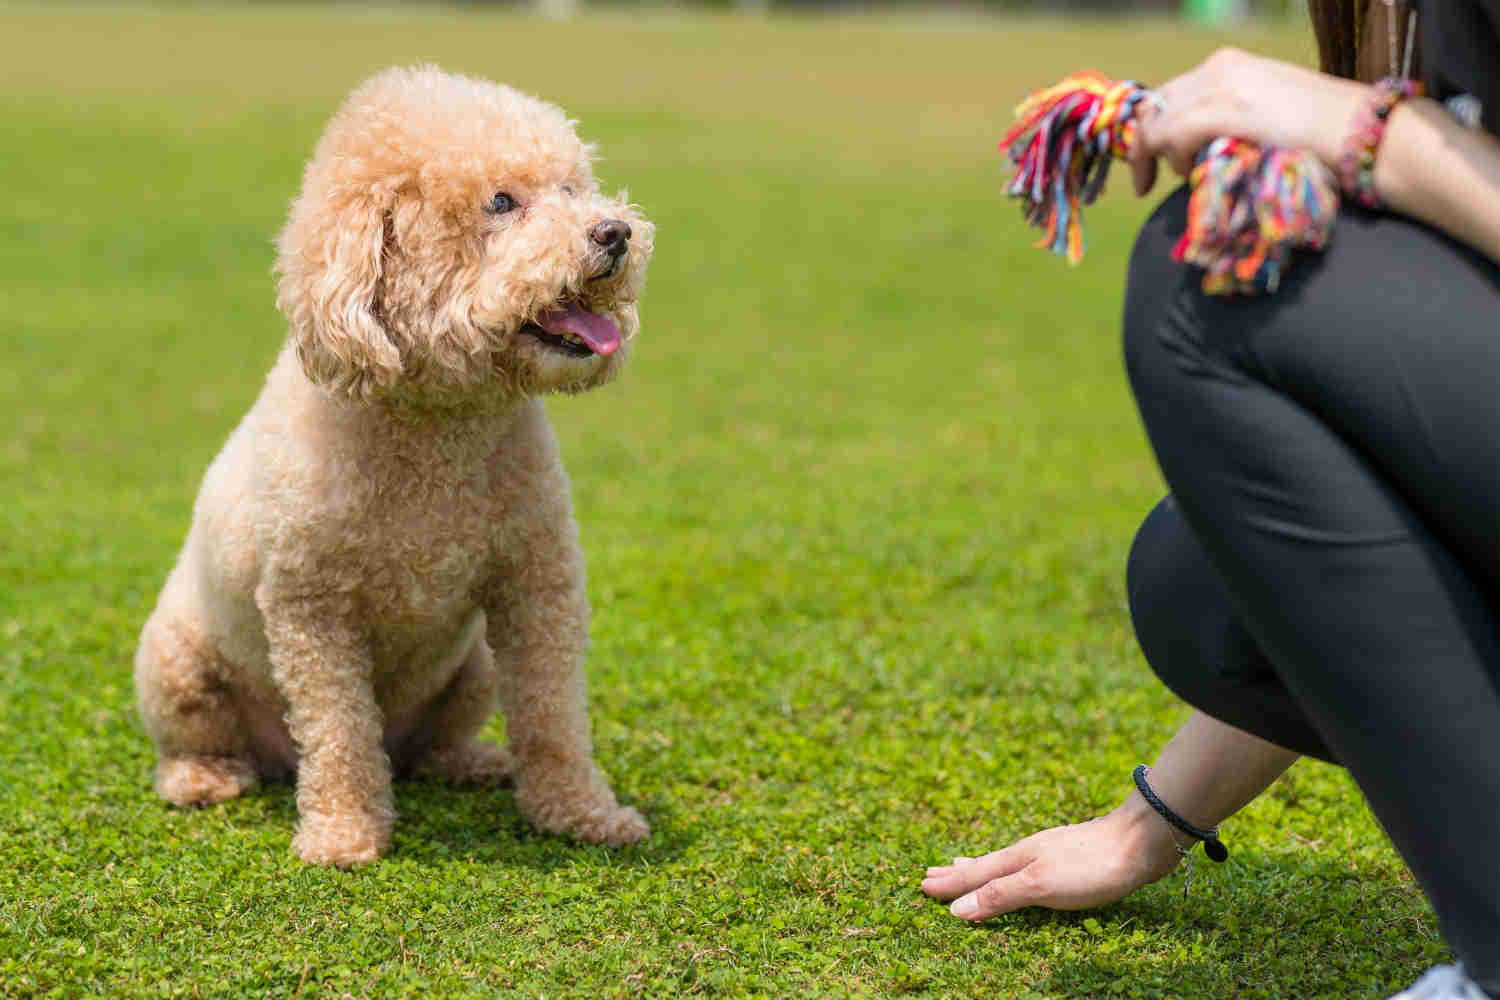 Are there any specific health concerns associated with miniature Poodles compared to standard or toy Poodles?